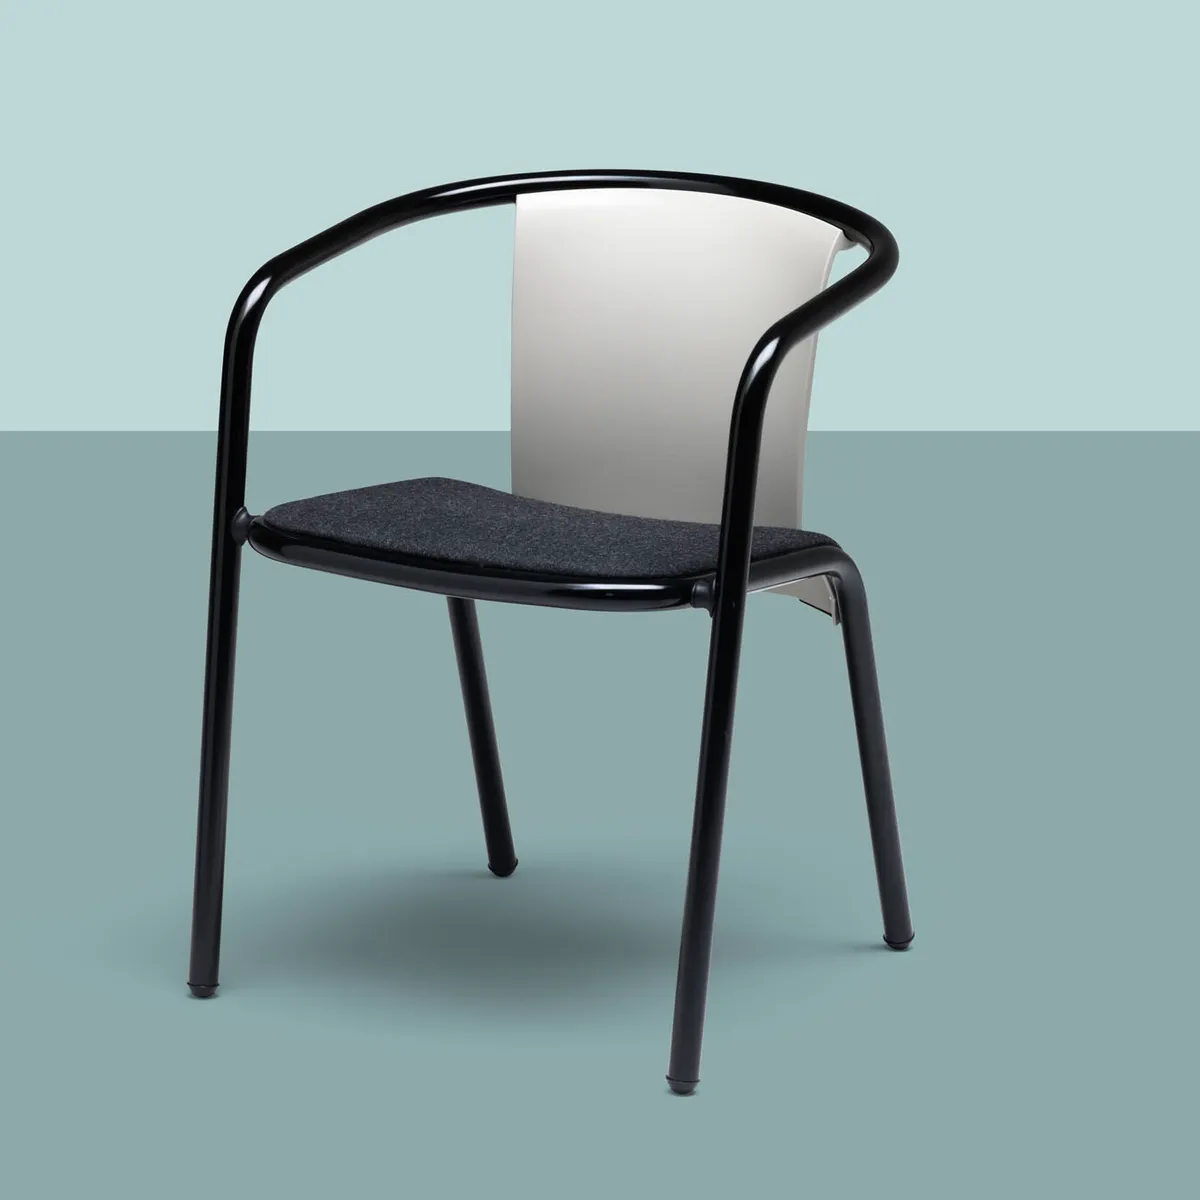 Mare Armchair For Outdoors In Metal Black Finish